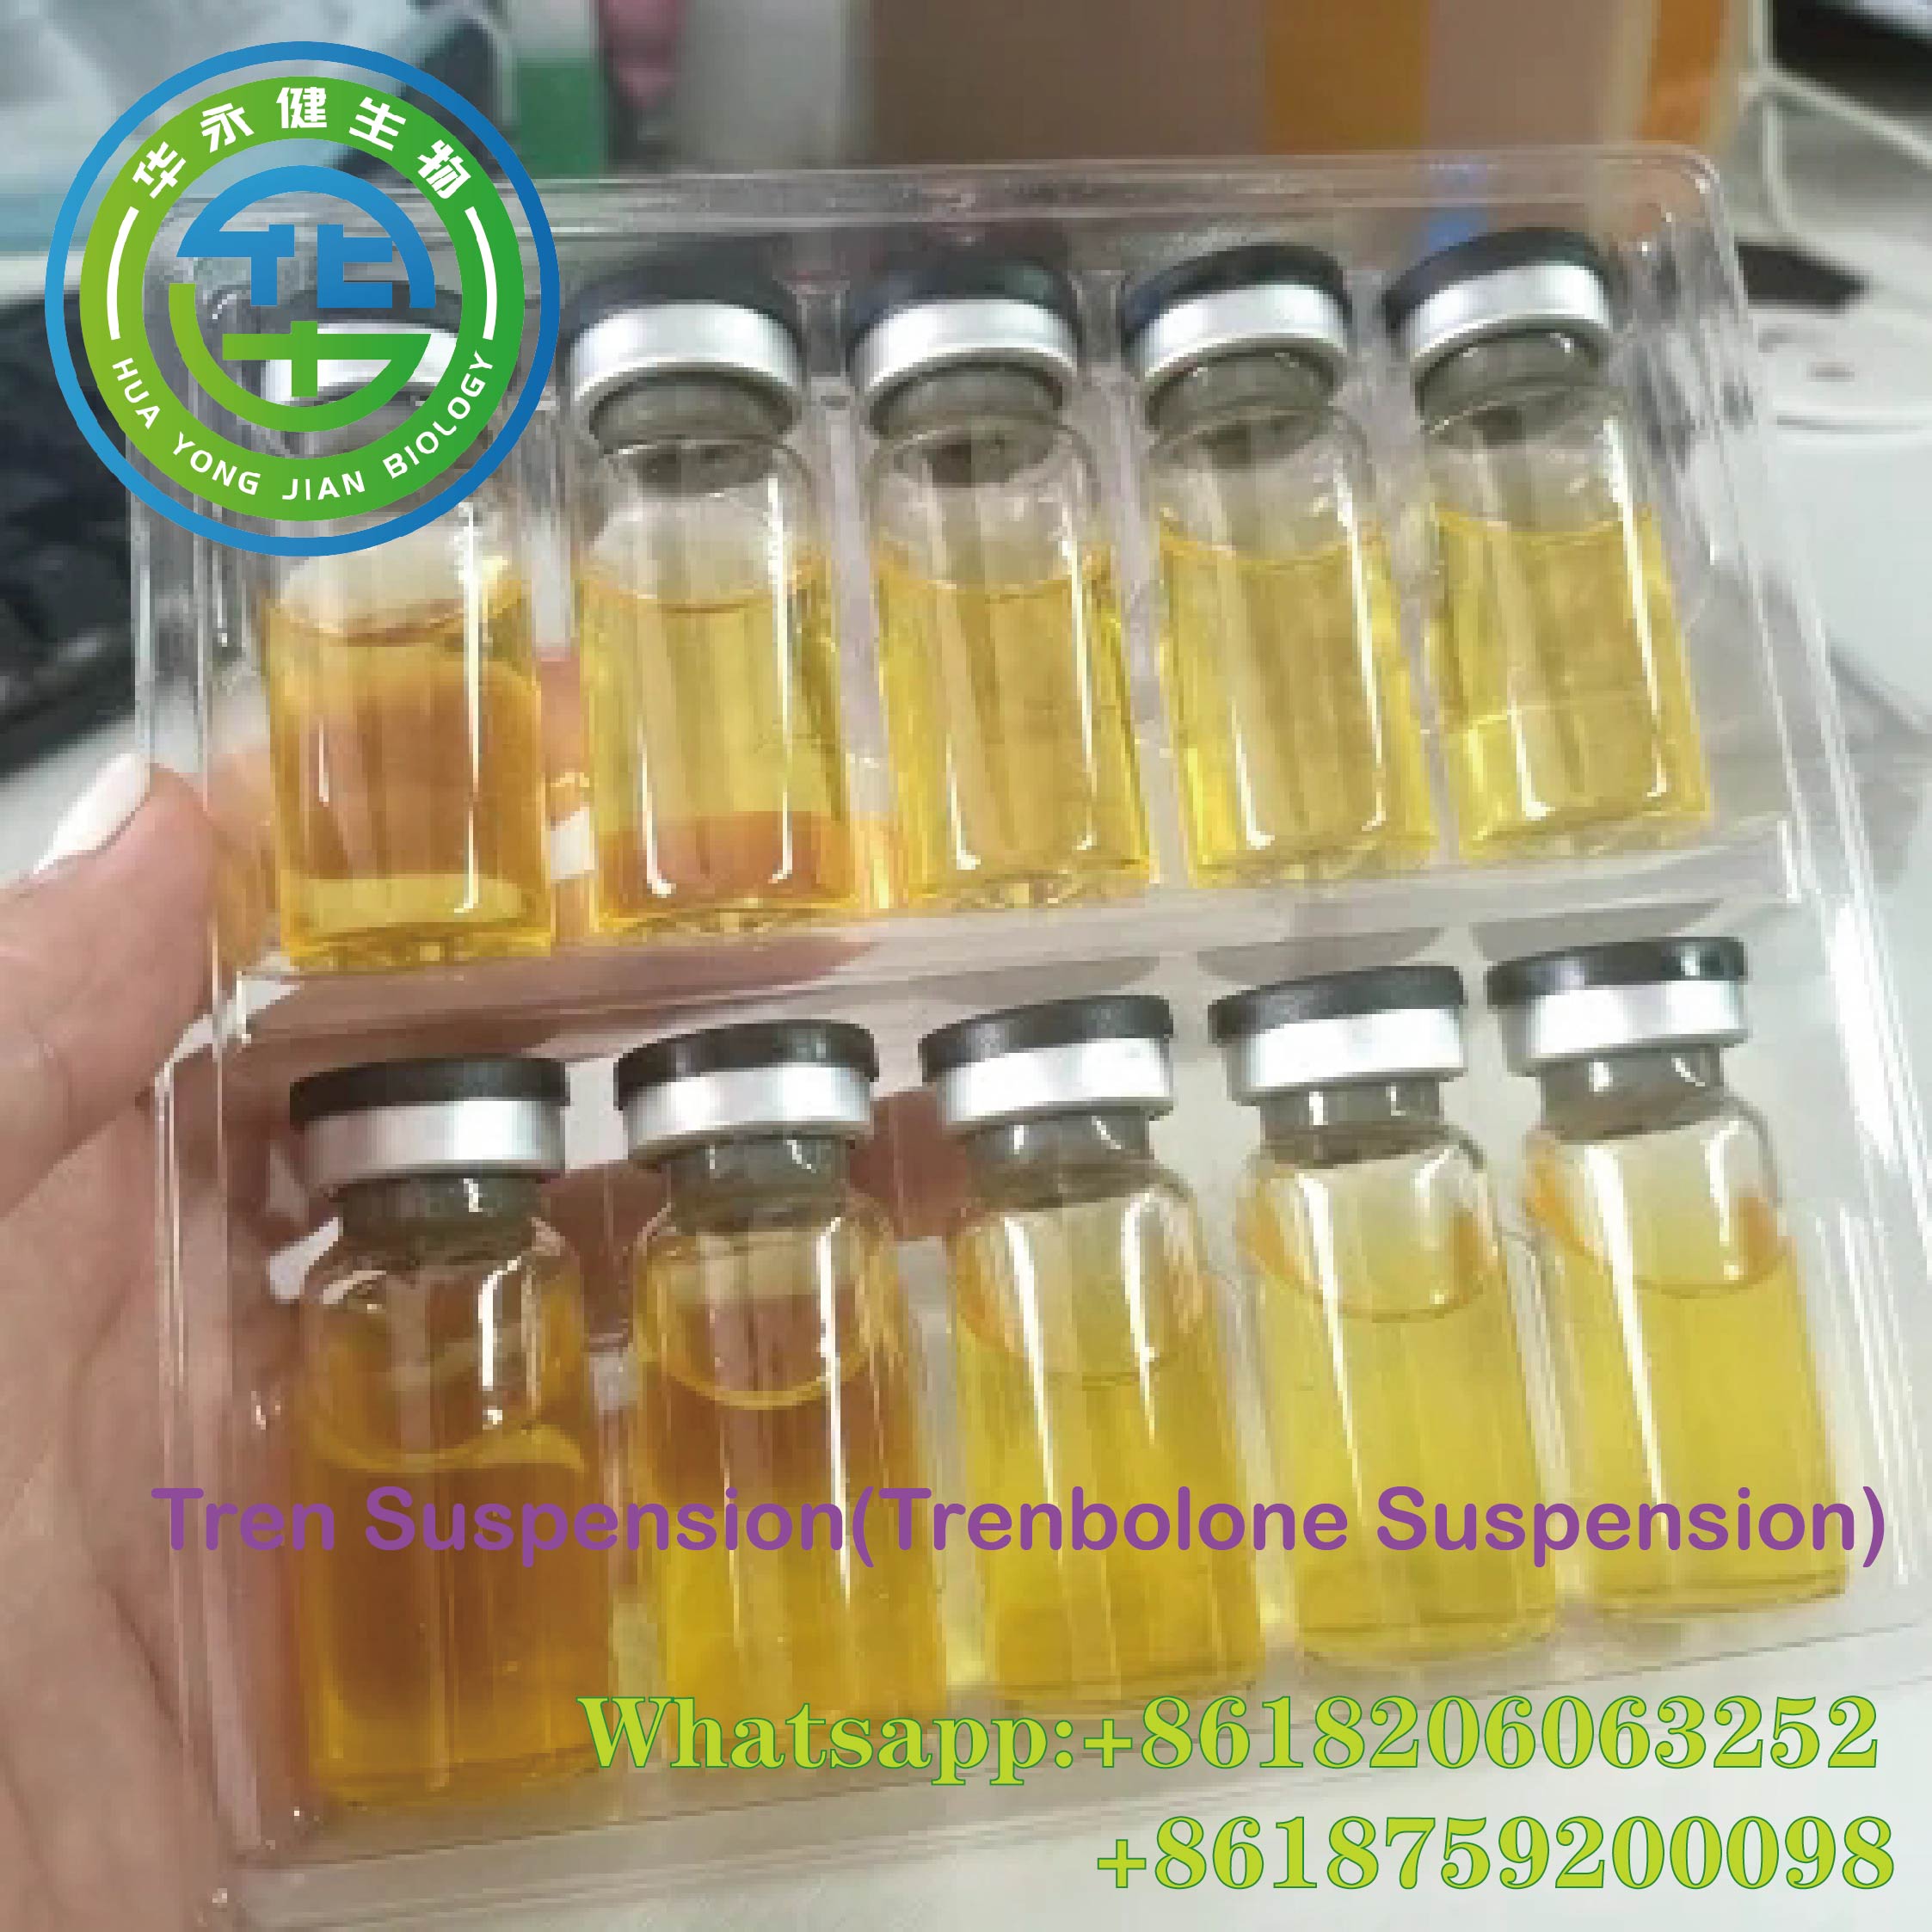 Trenbolone Suspension 100 Body Building Strong Effects 99% Purity 100mg/ml Anabolic Steroids